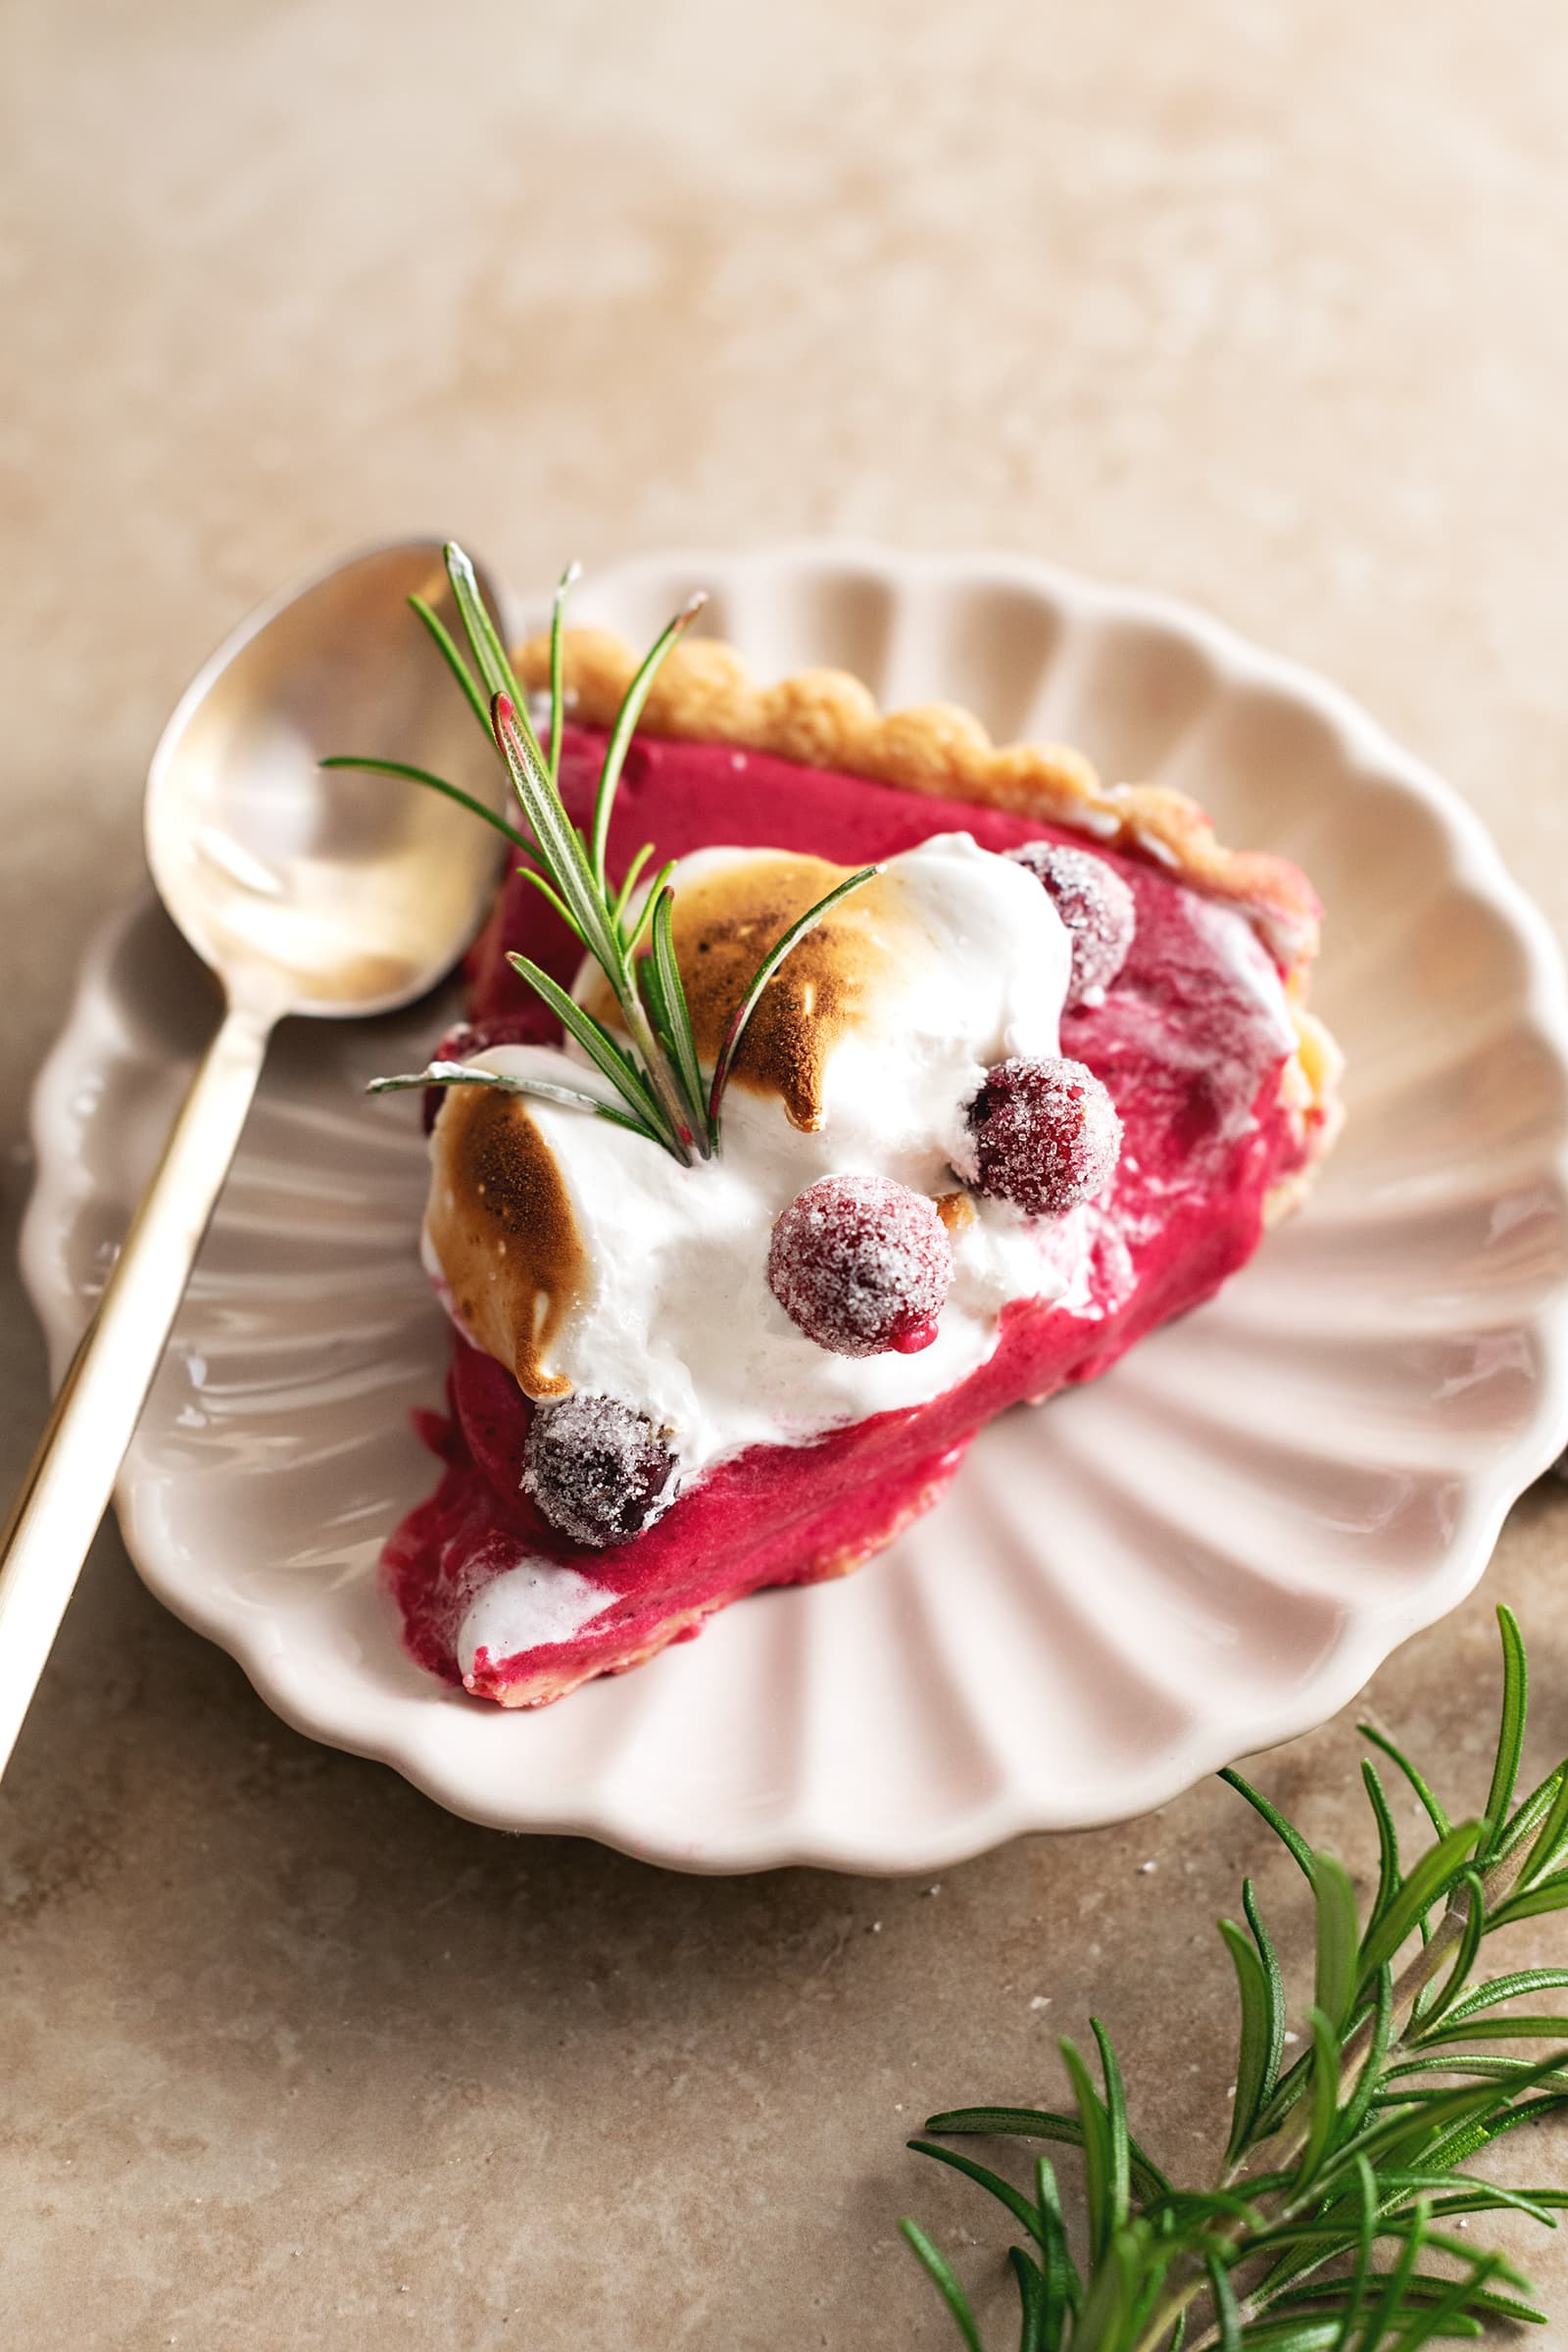 A slice of cranberry meringue tart on a plate with a spoon.